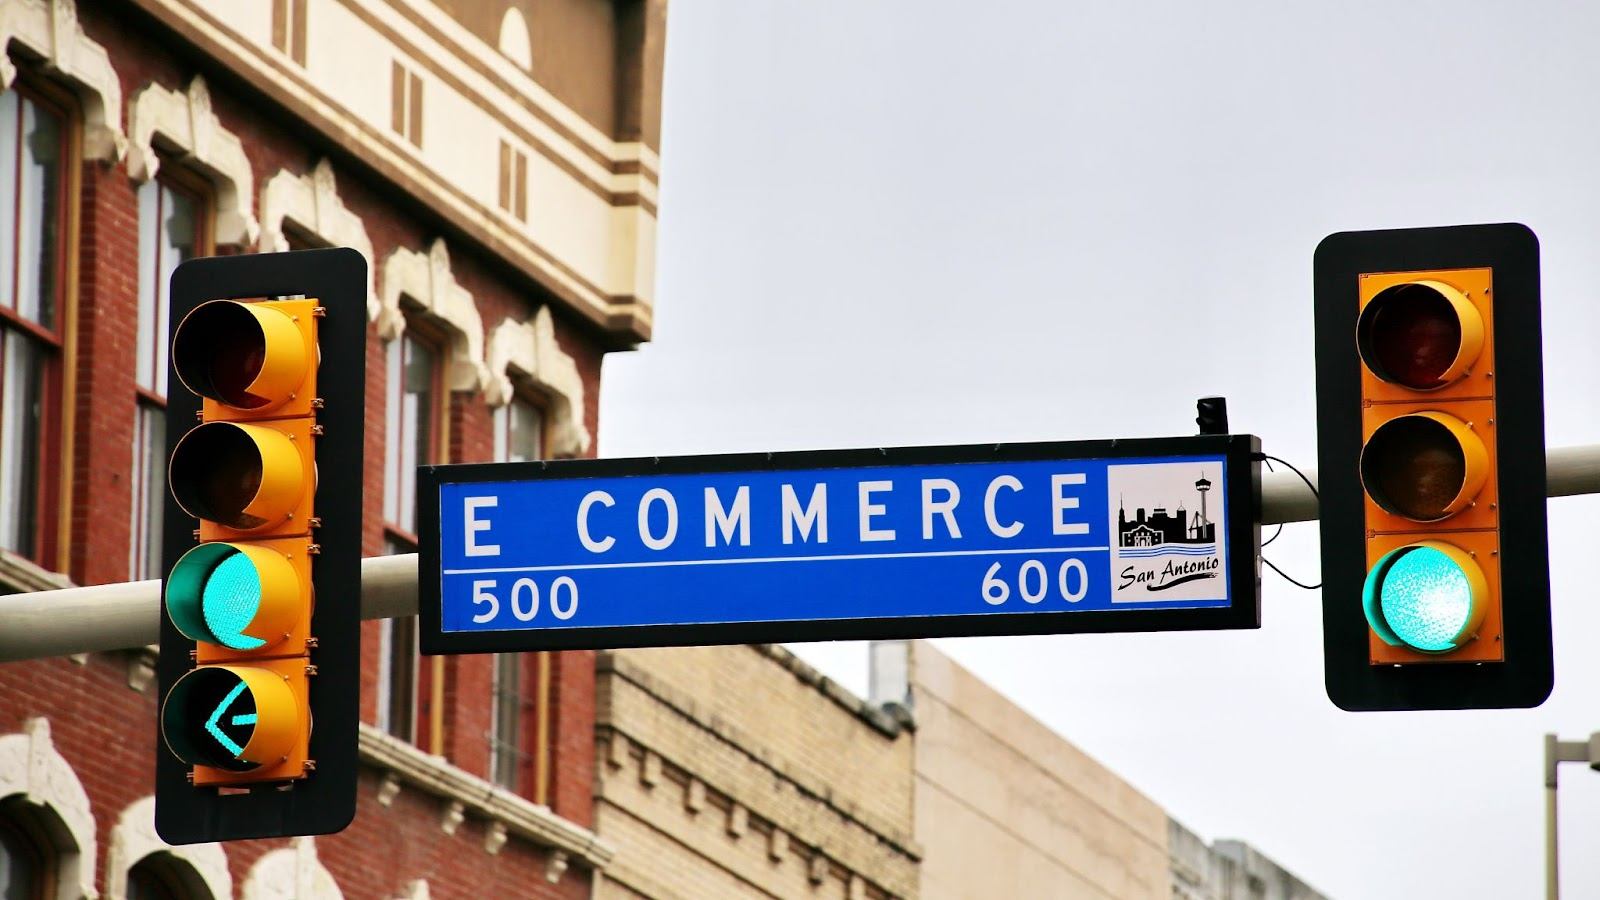 e commerce street sign beside a green stop light benefits of owning an ecommerce store